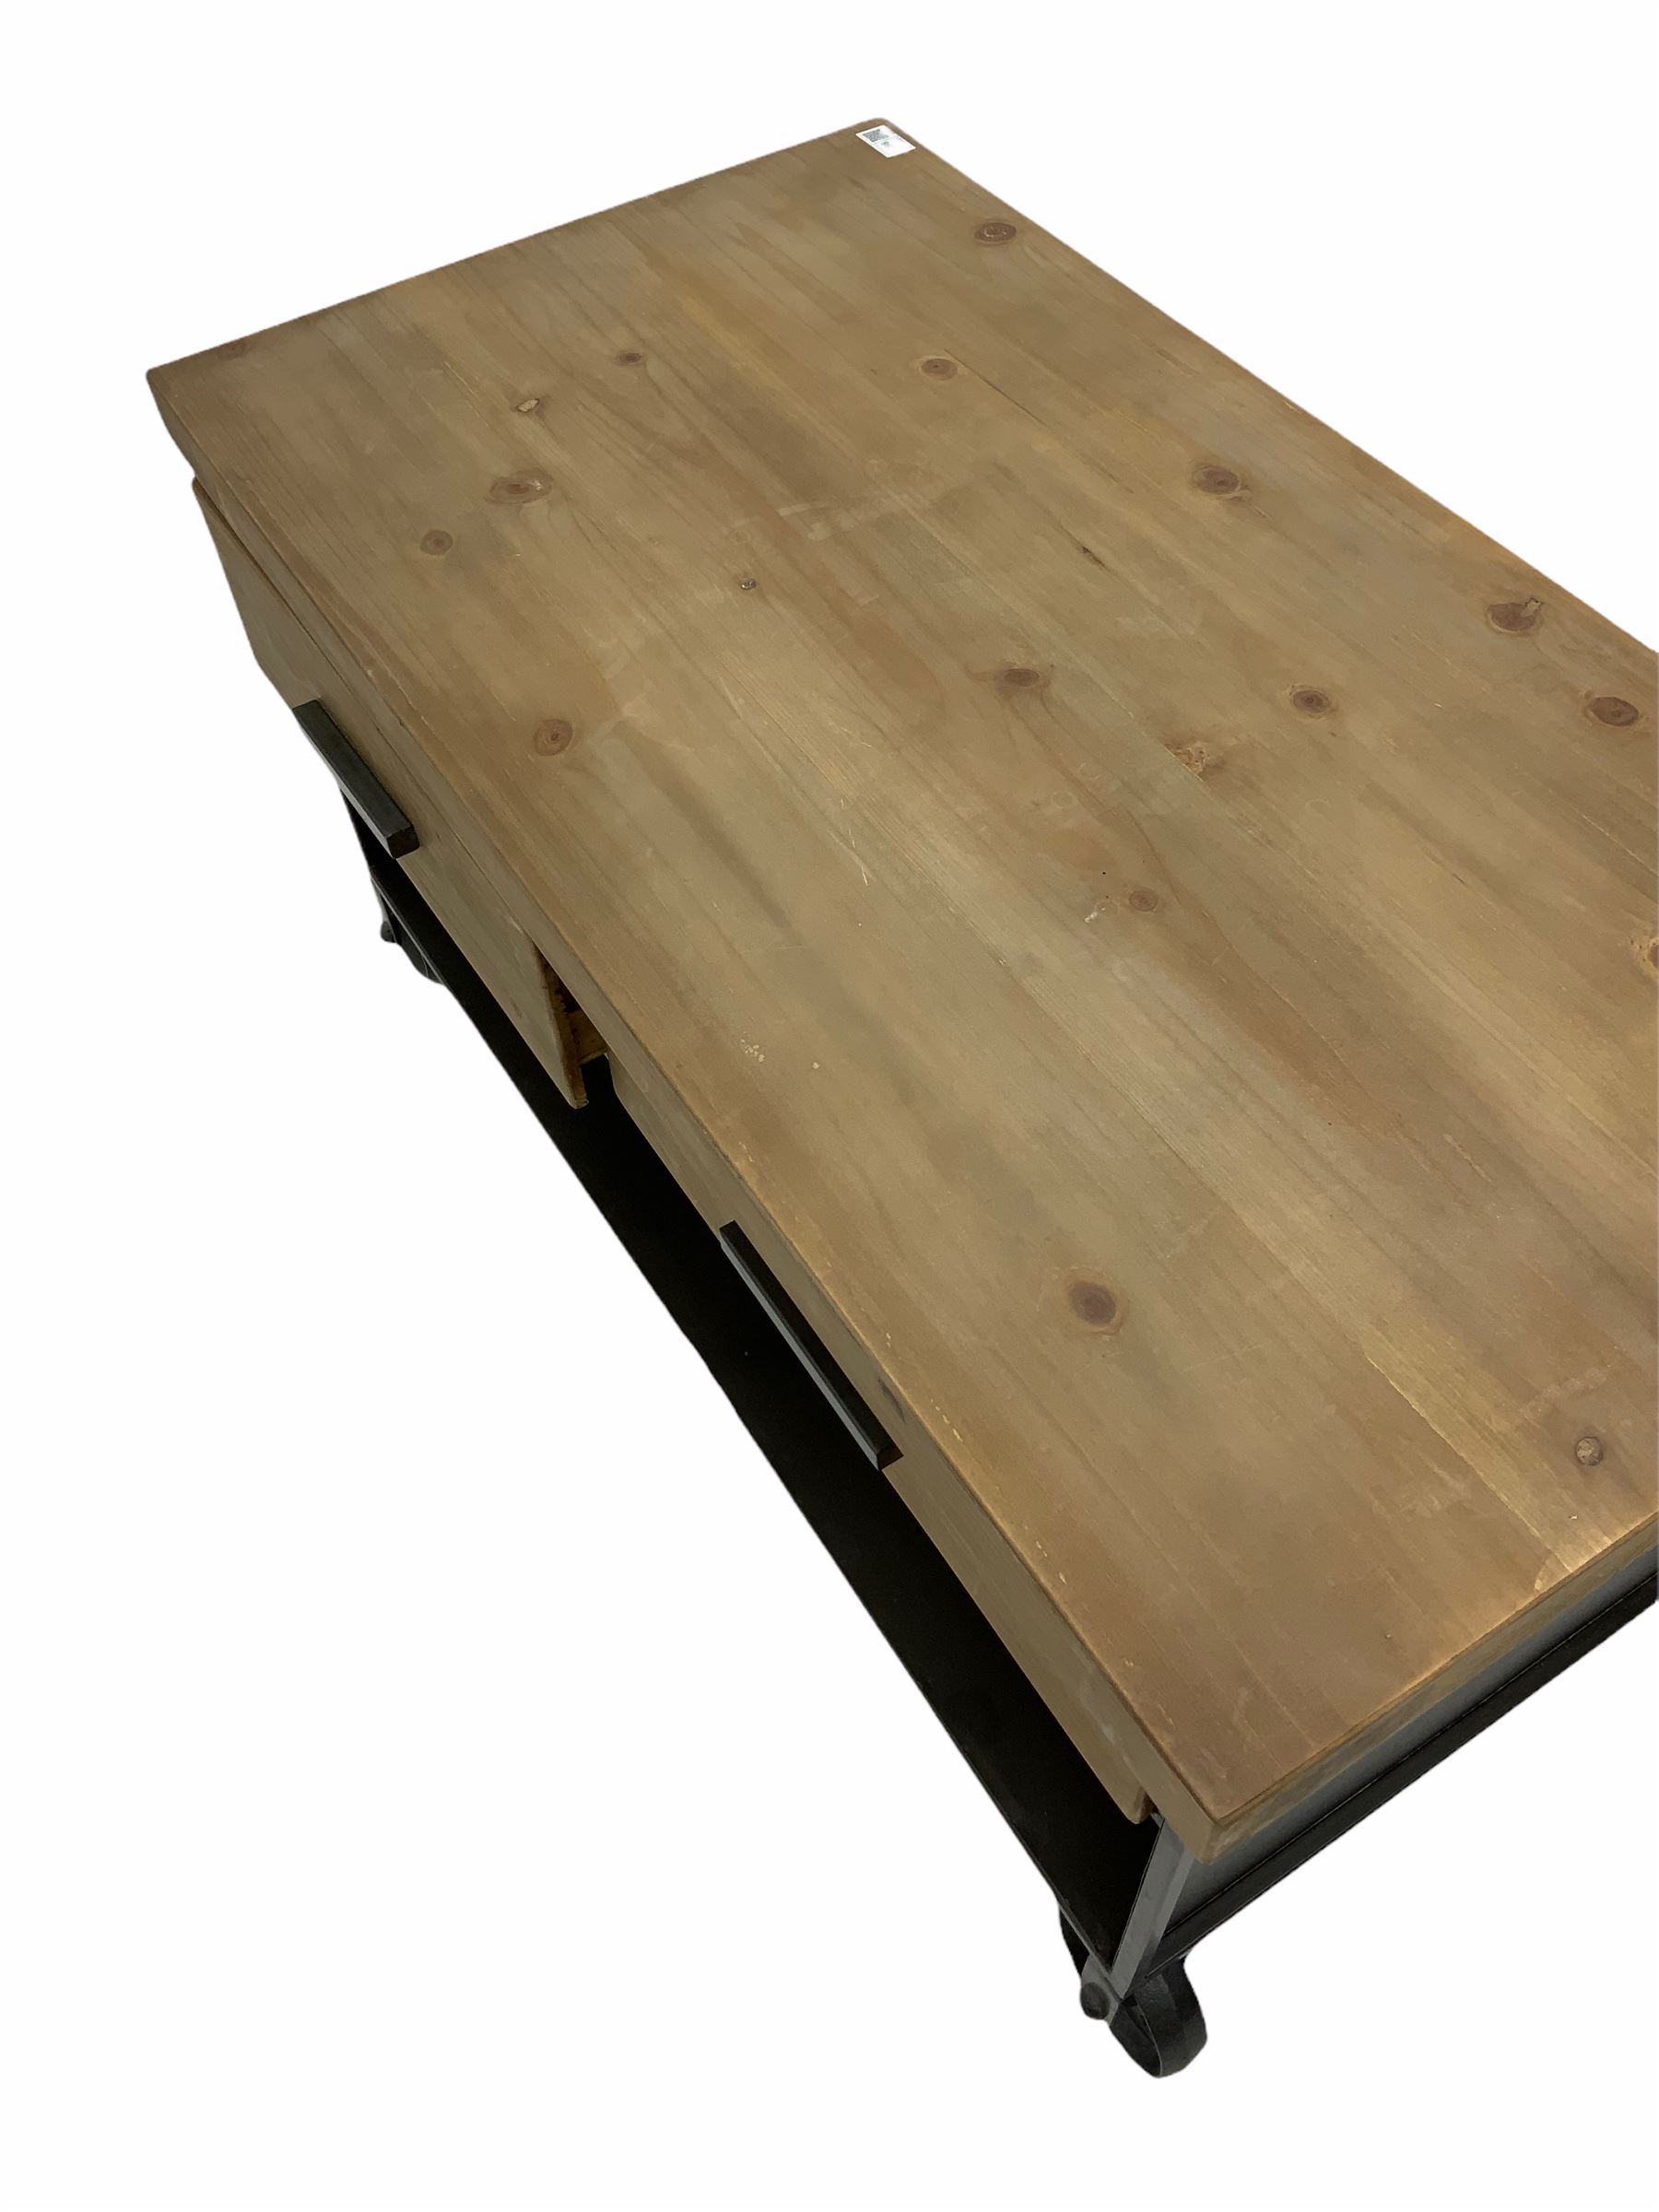 Industrial design pine and metal framed coffee table - Image 2 of 2